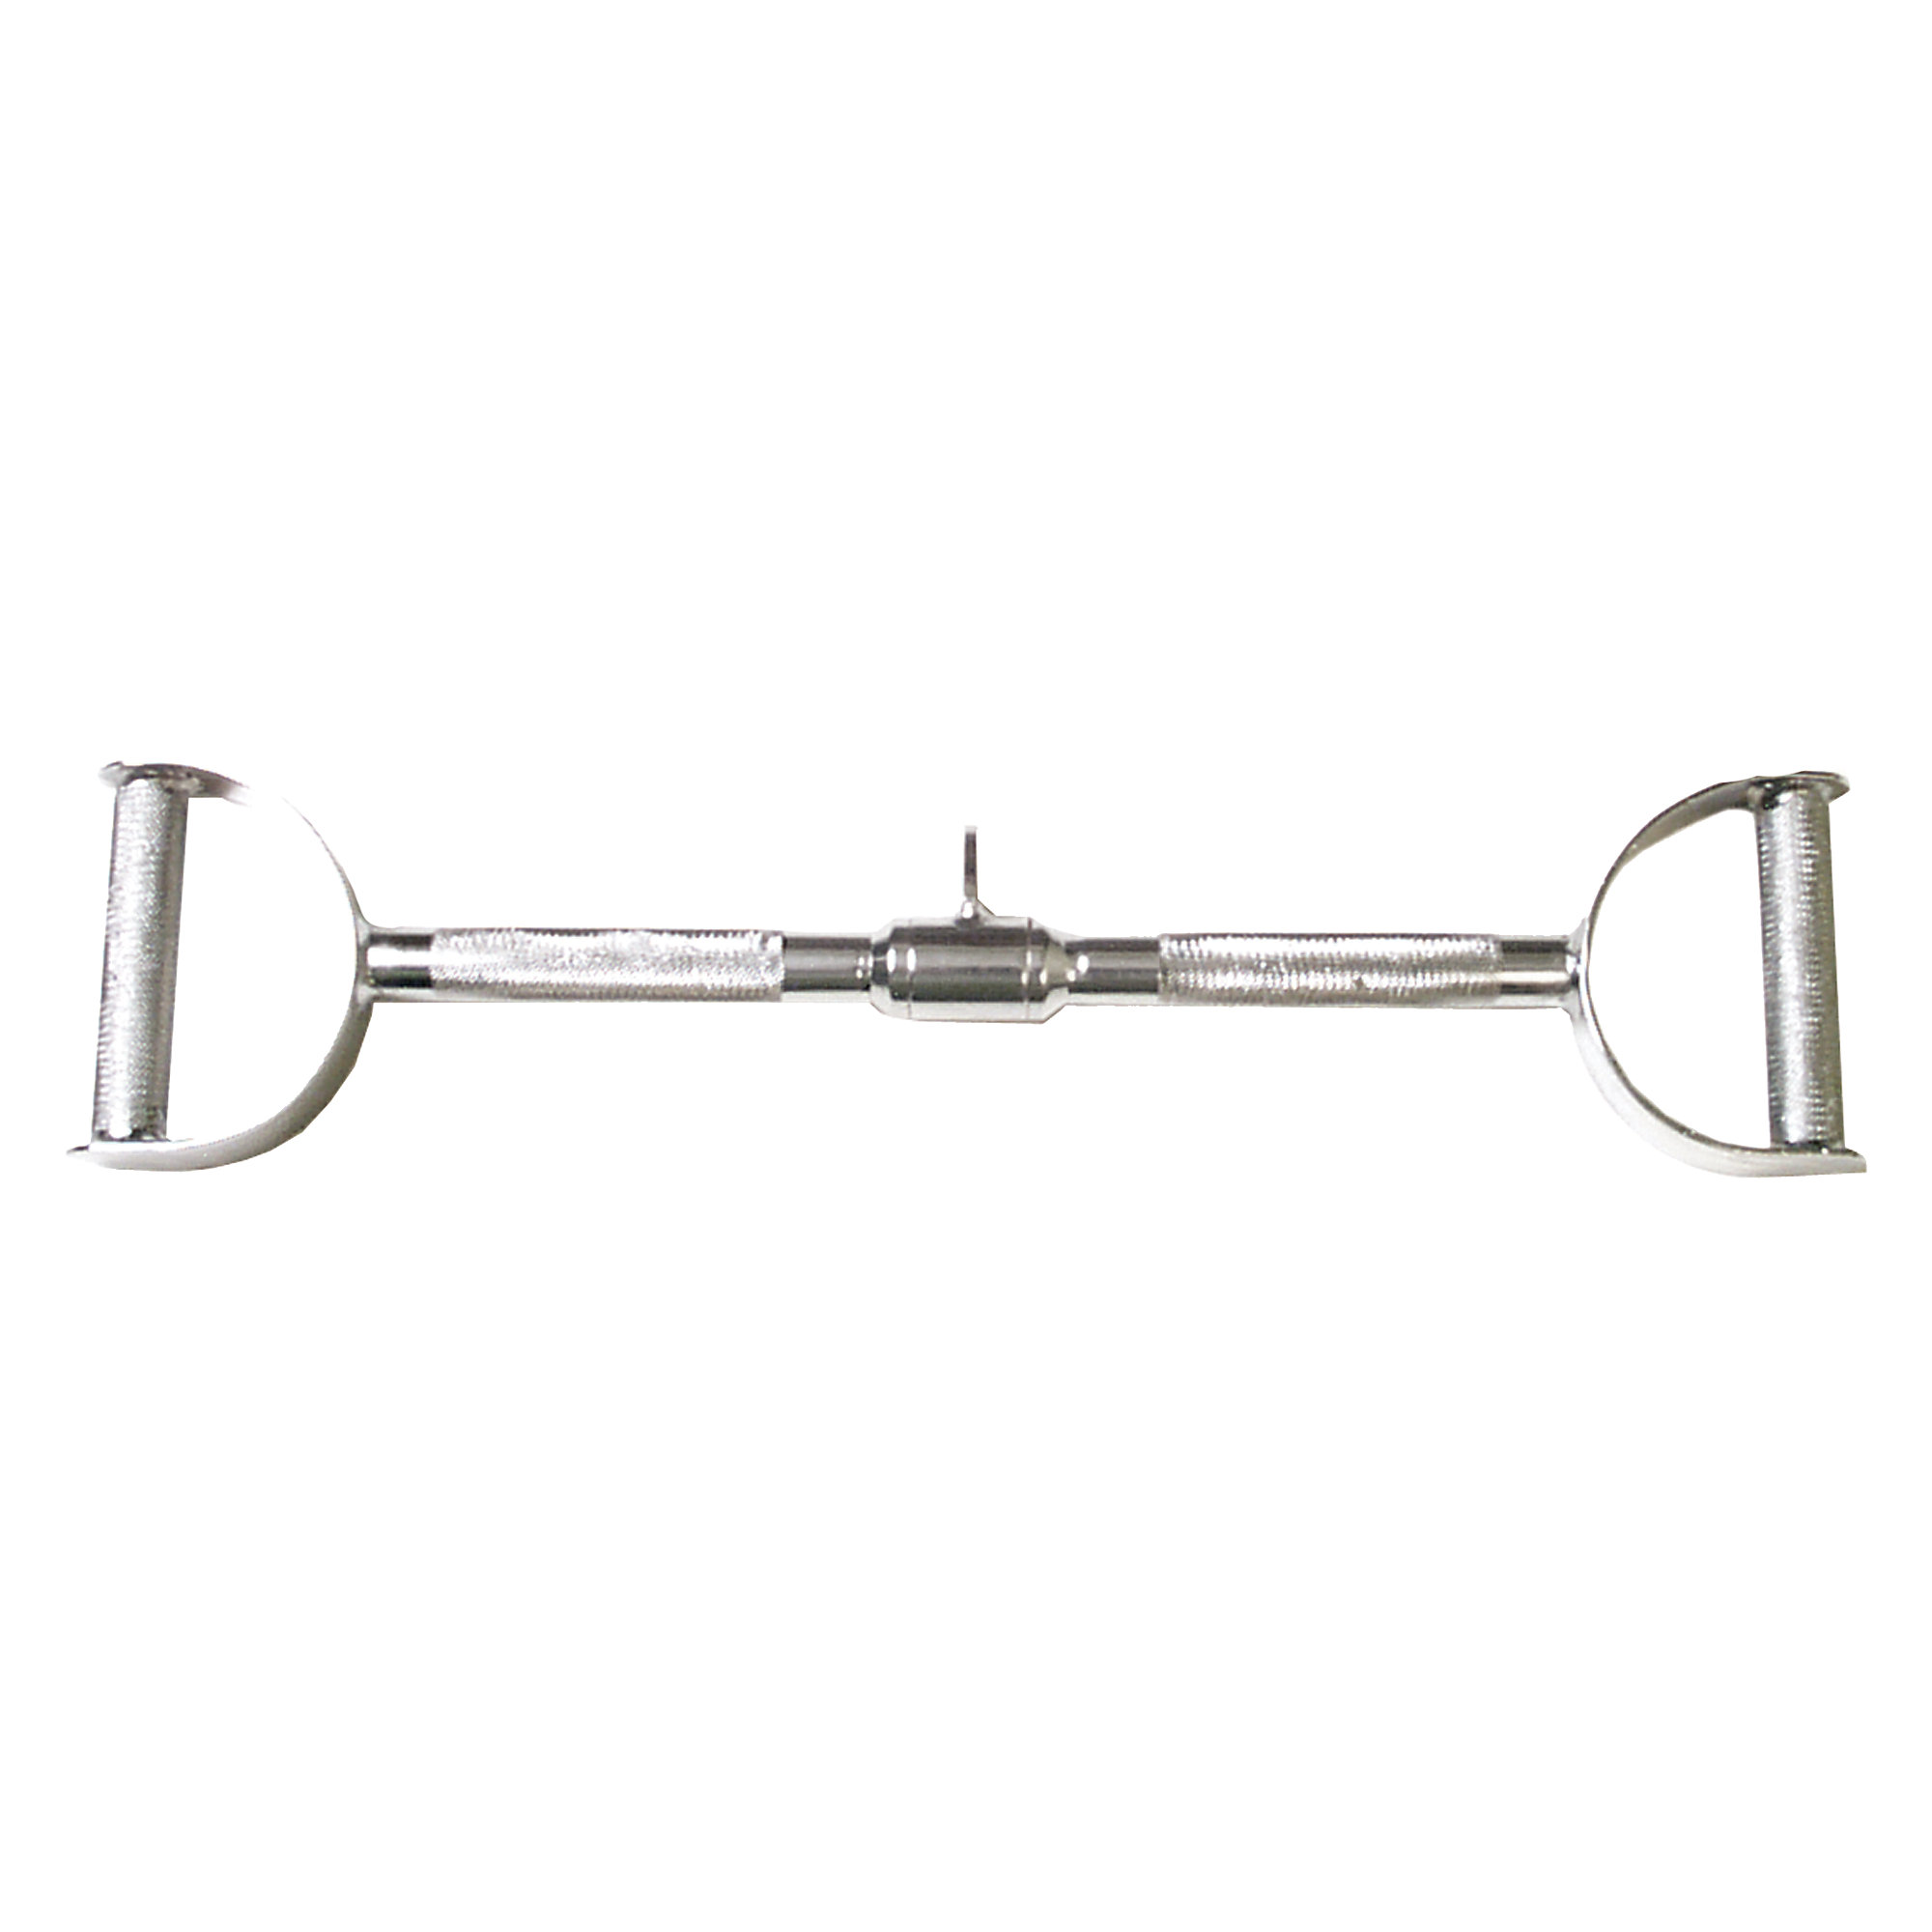 24" Pro-Style Lat Bar with Stirrup Handles and Knurled Grips